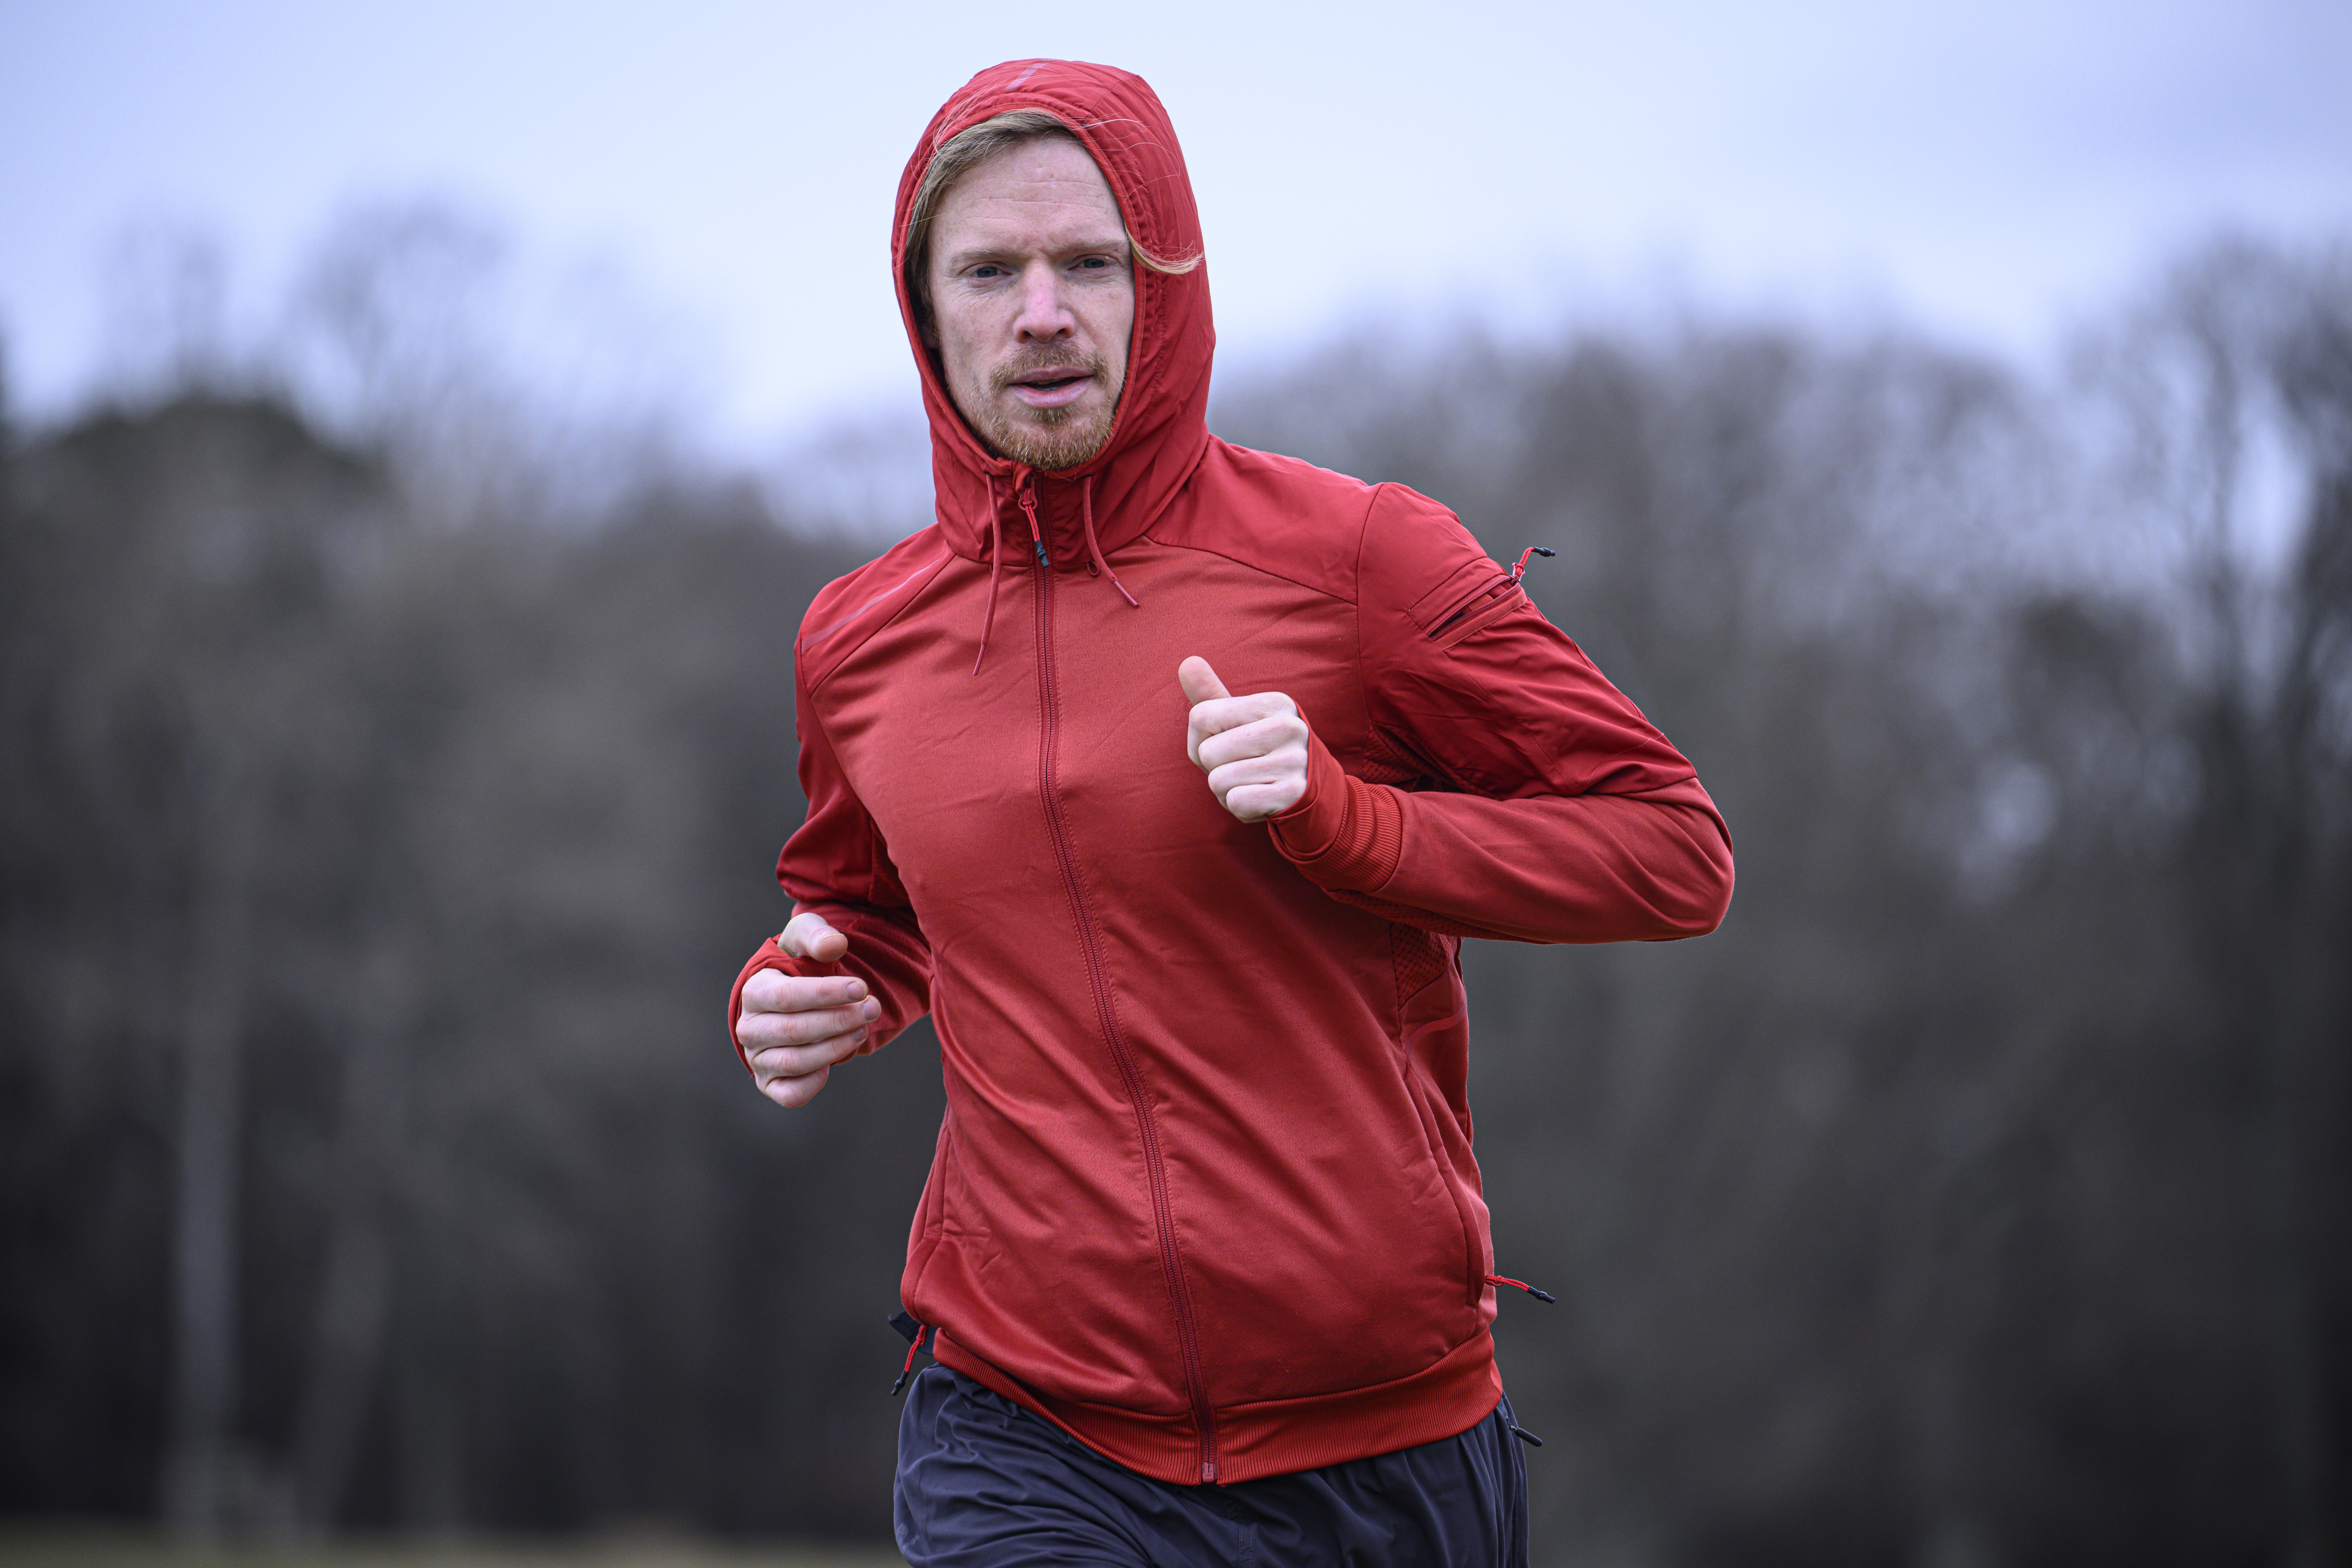 A man in a red jacket running